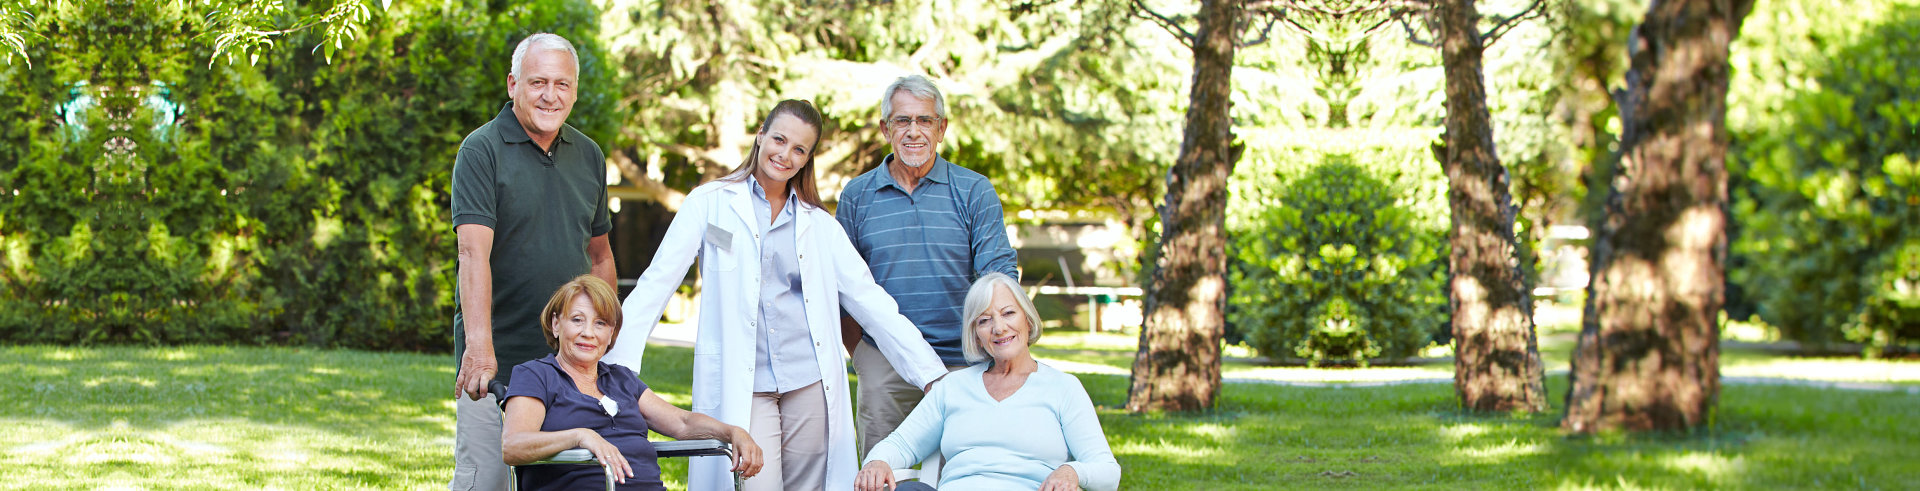 group of elderly people and caregiver